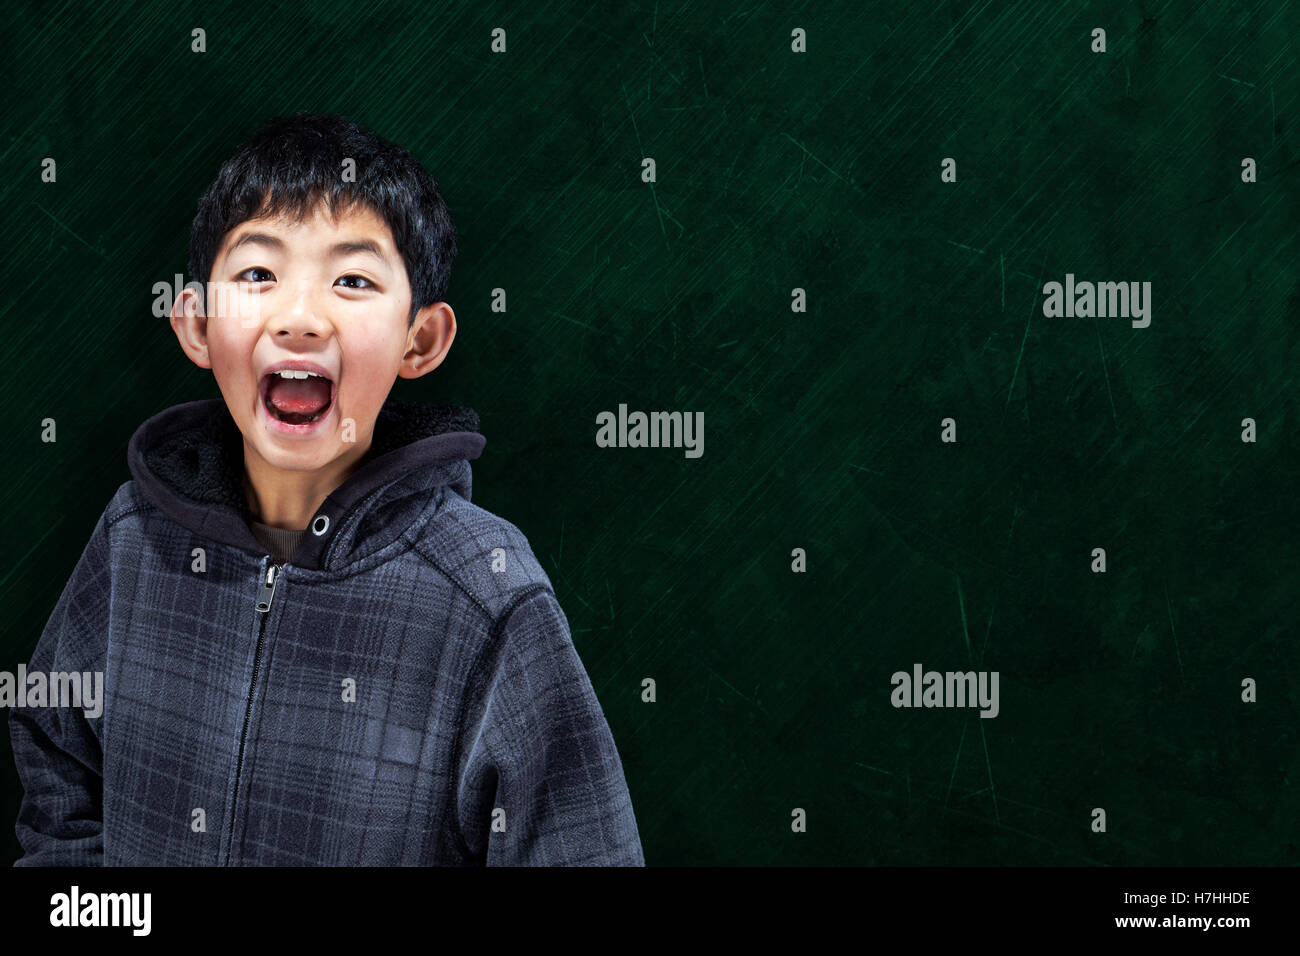 Smart Asian boy with in classroom setting with chalkboard background and copy space Stock Photo